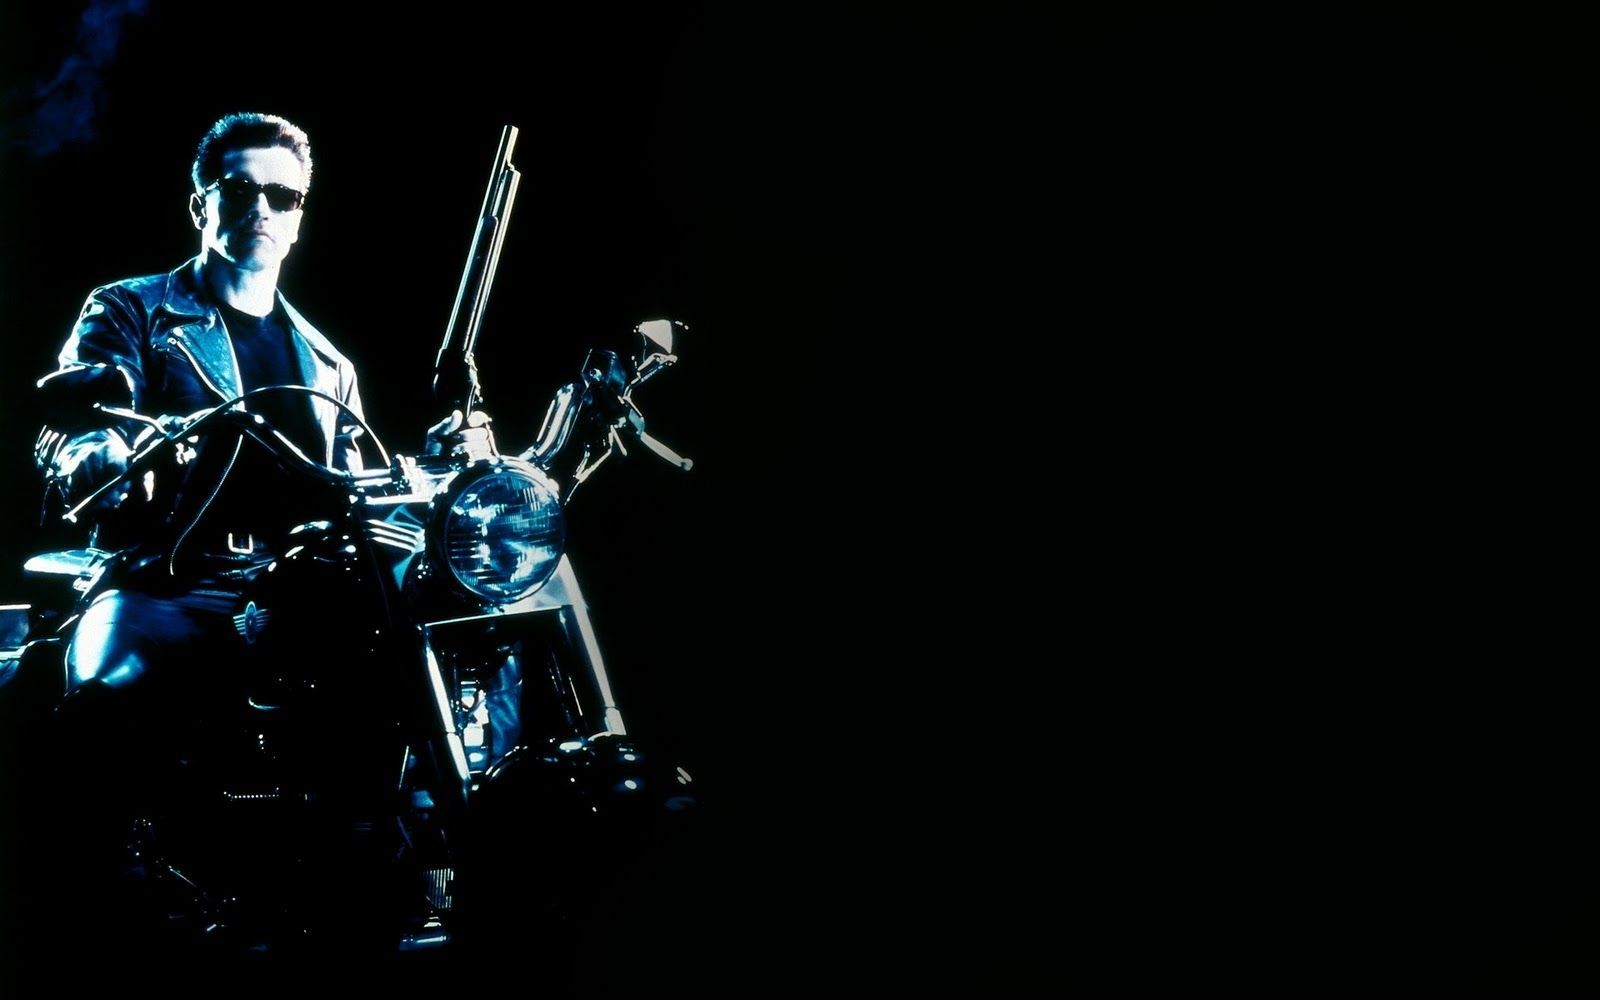 The Terminator HD Wallpapers & Images - All HD Wallpapers